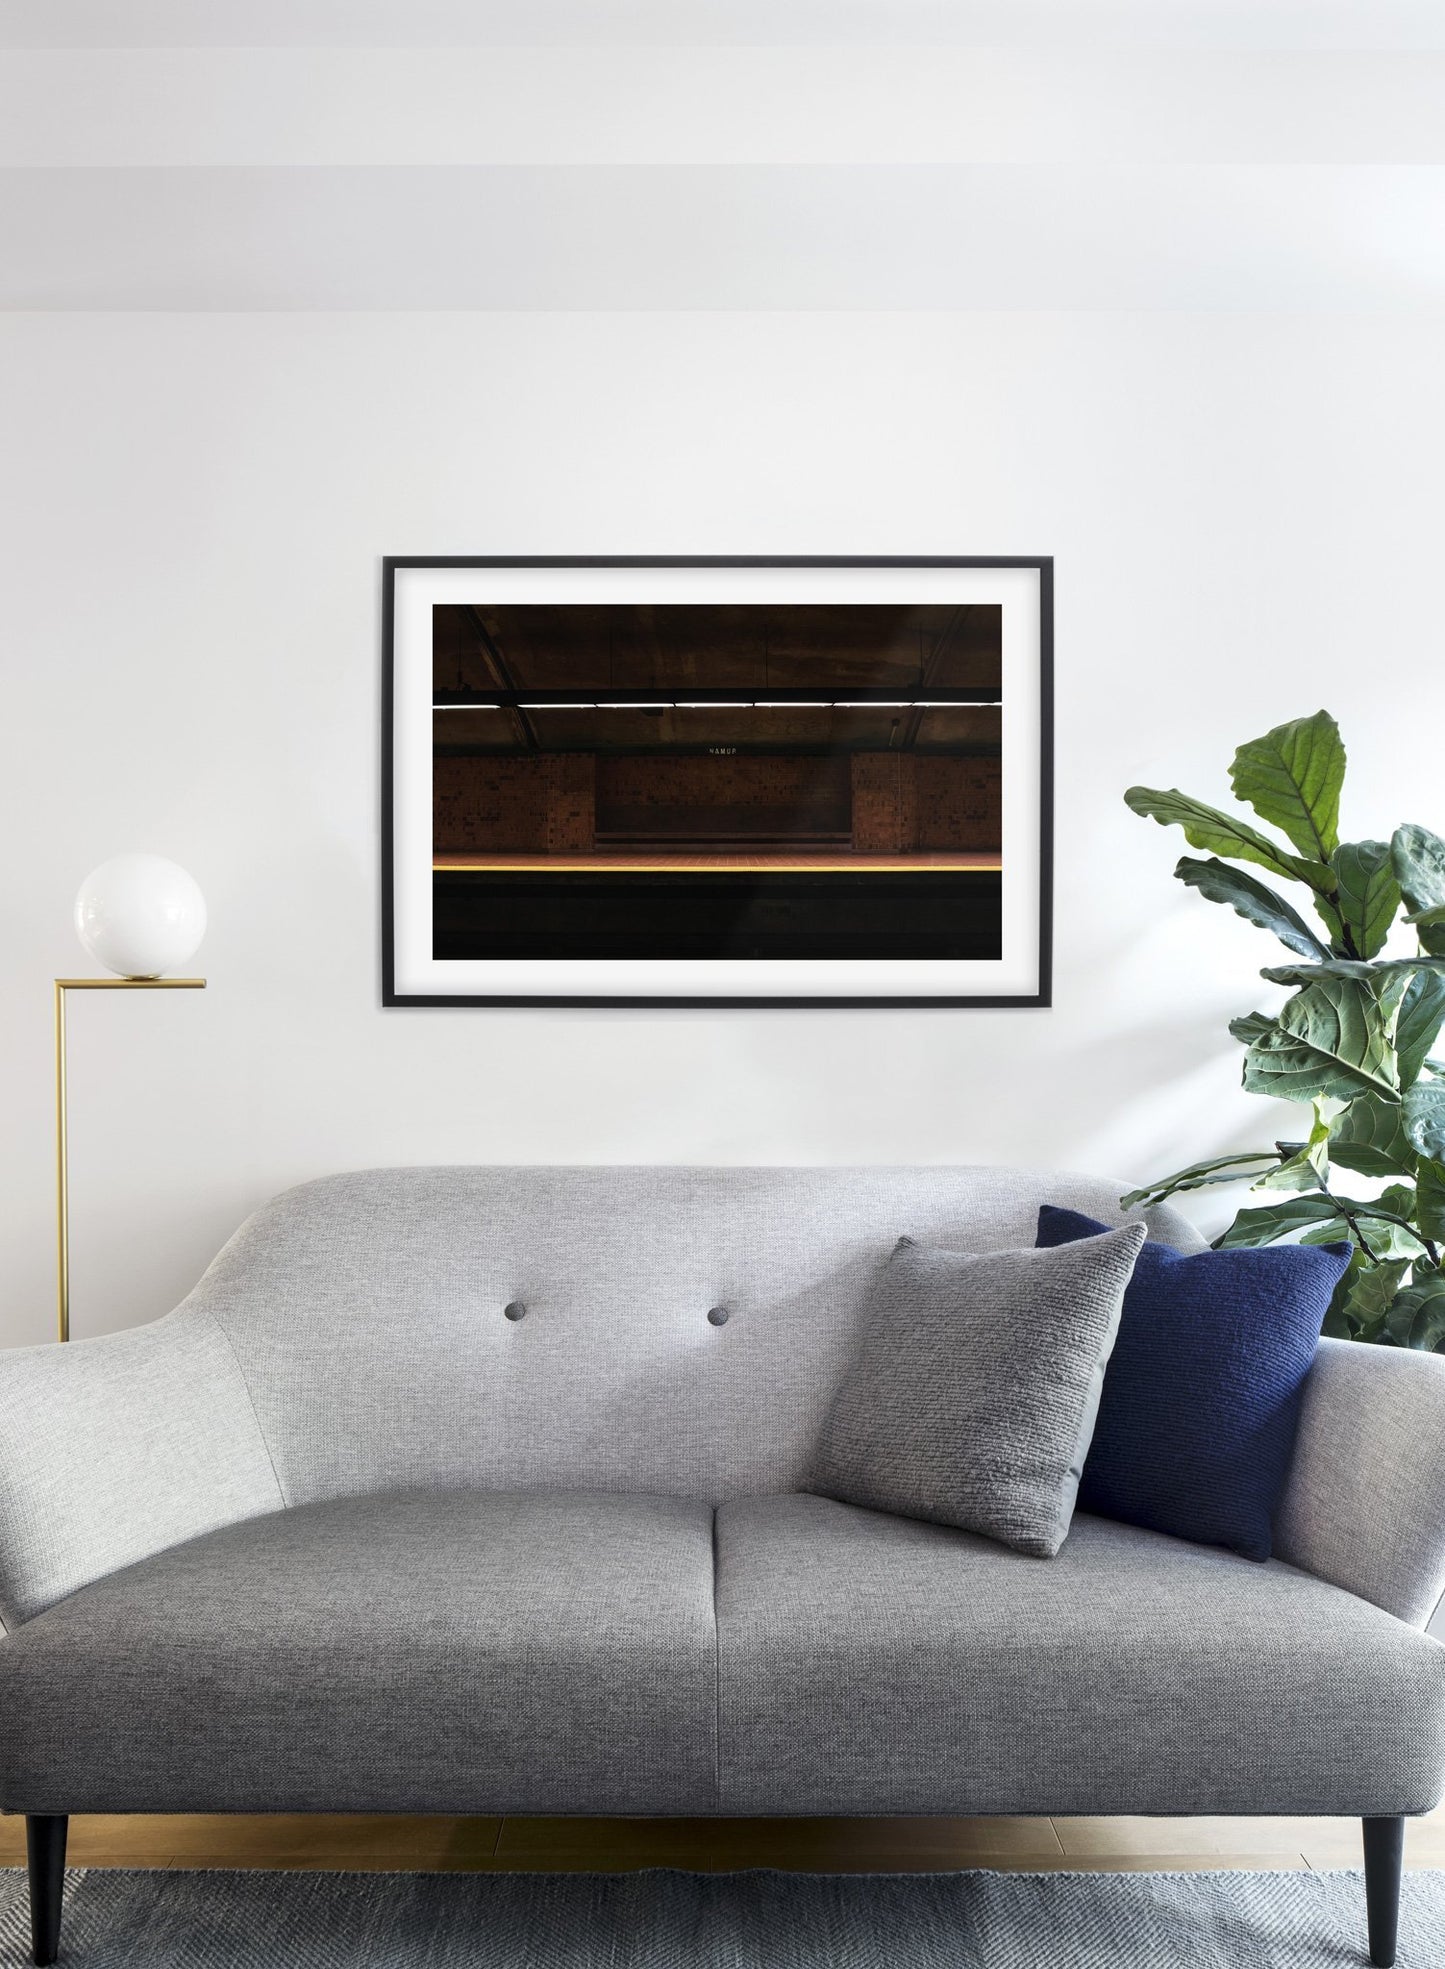 Namur Station modern minimalist photography poster by Opposite Wall - Living room